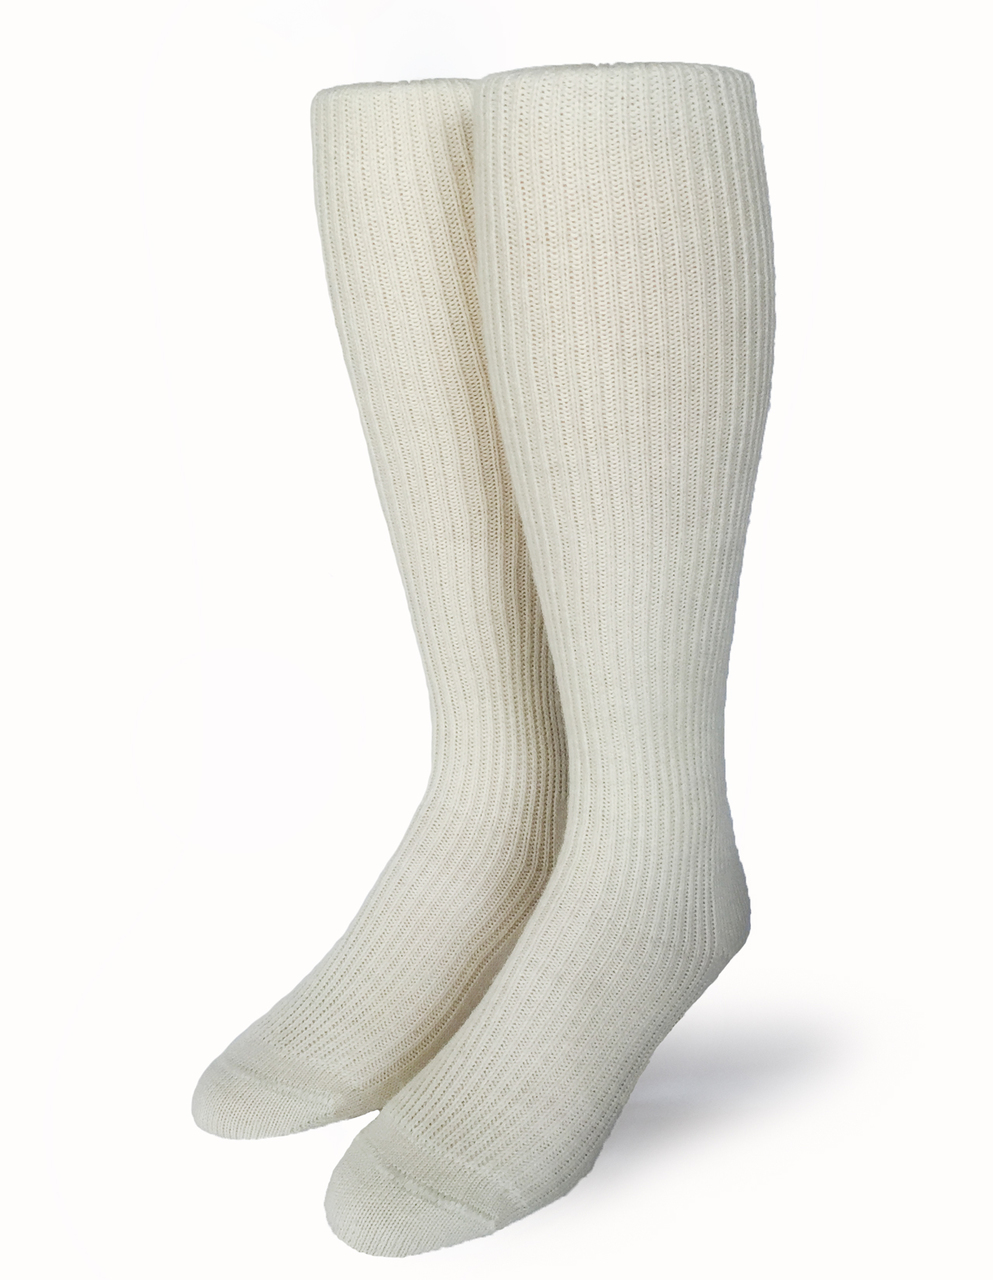 Old Fashioned Tender Tube Socks for Men and Women - Baby Alpaca | Sun ...